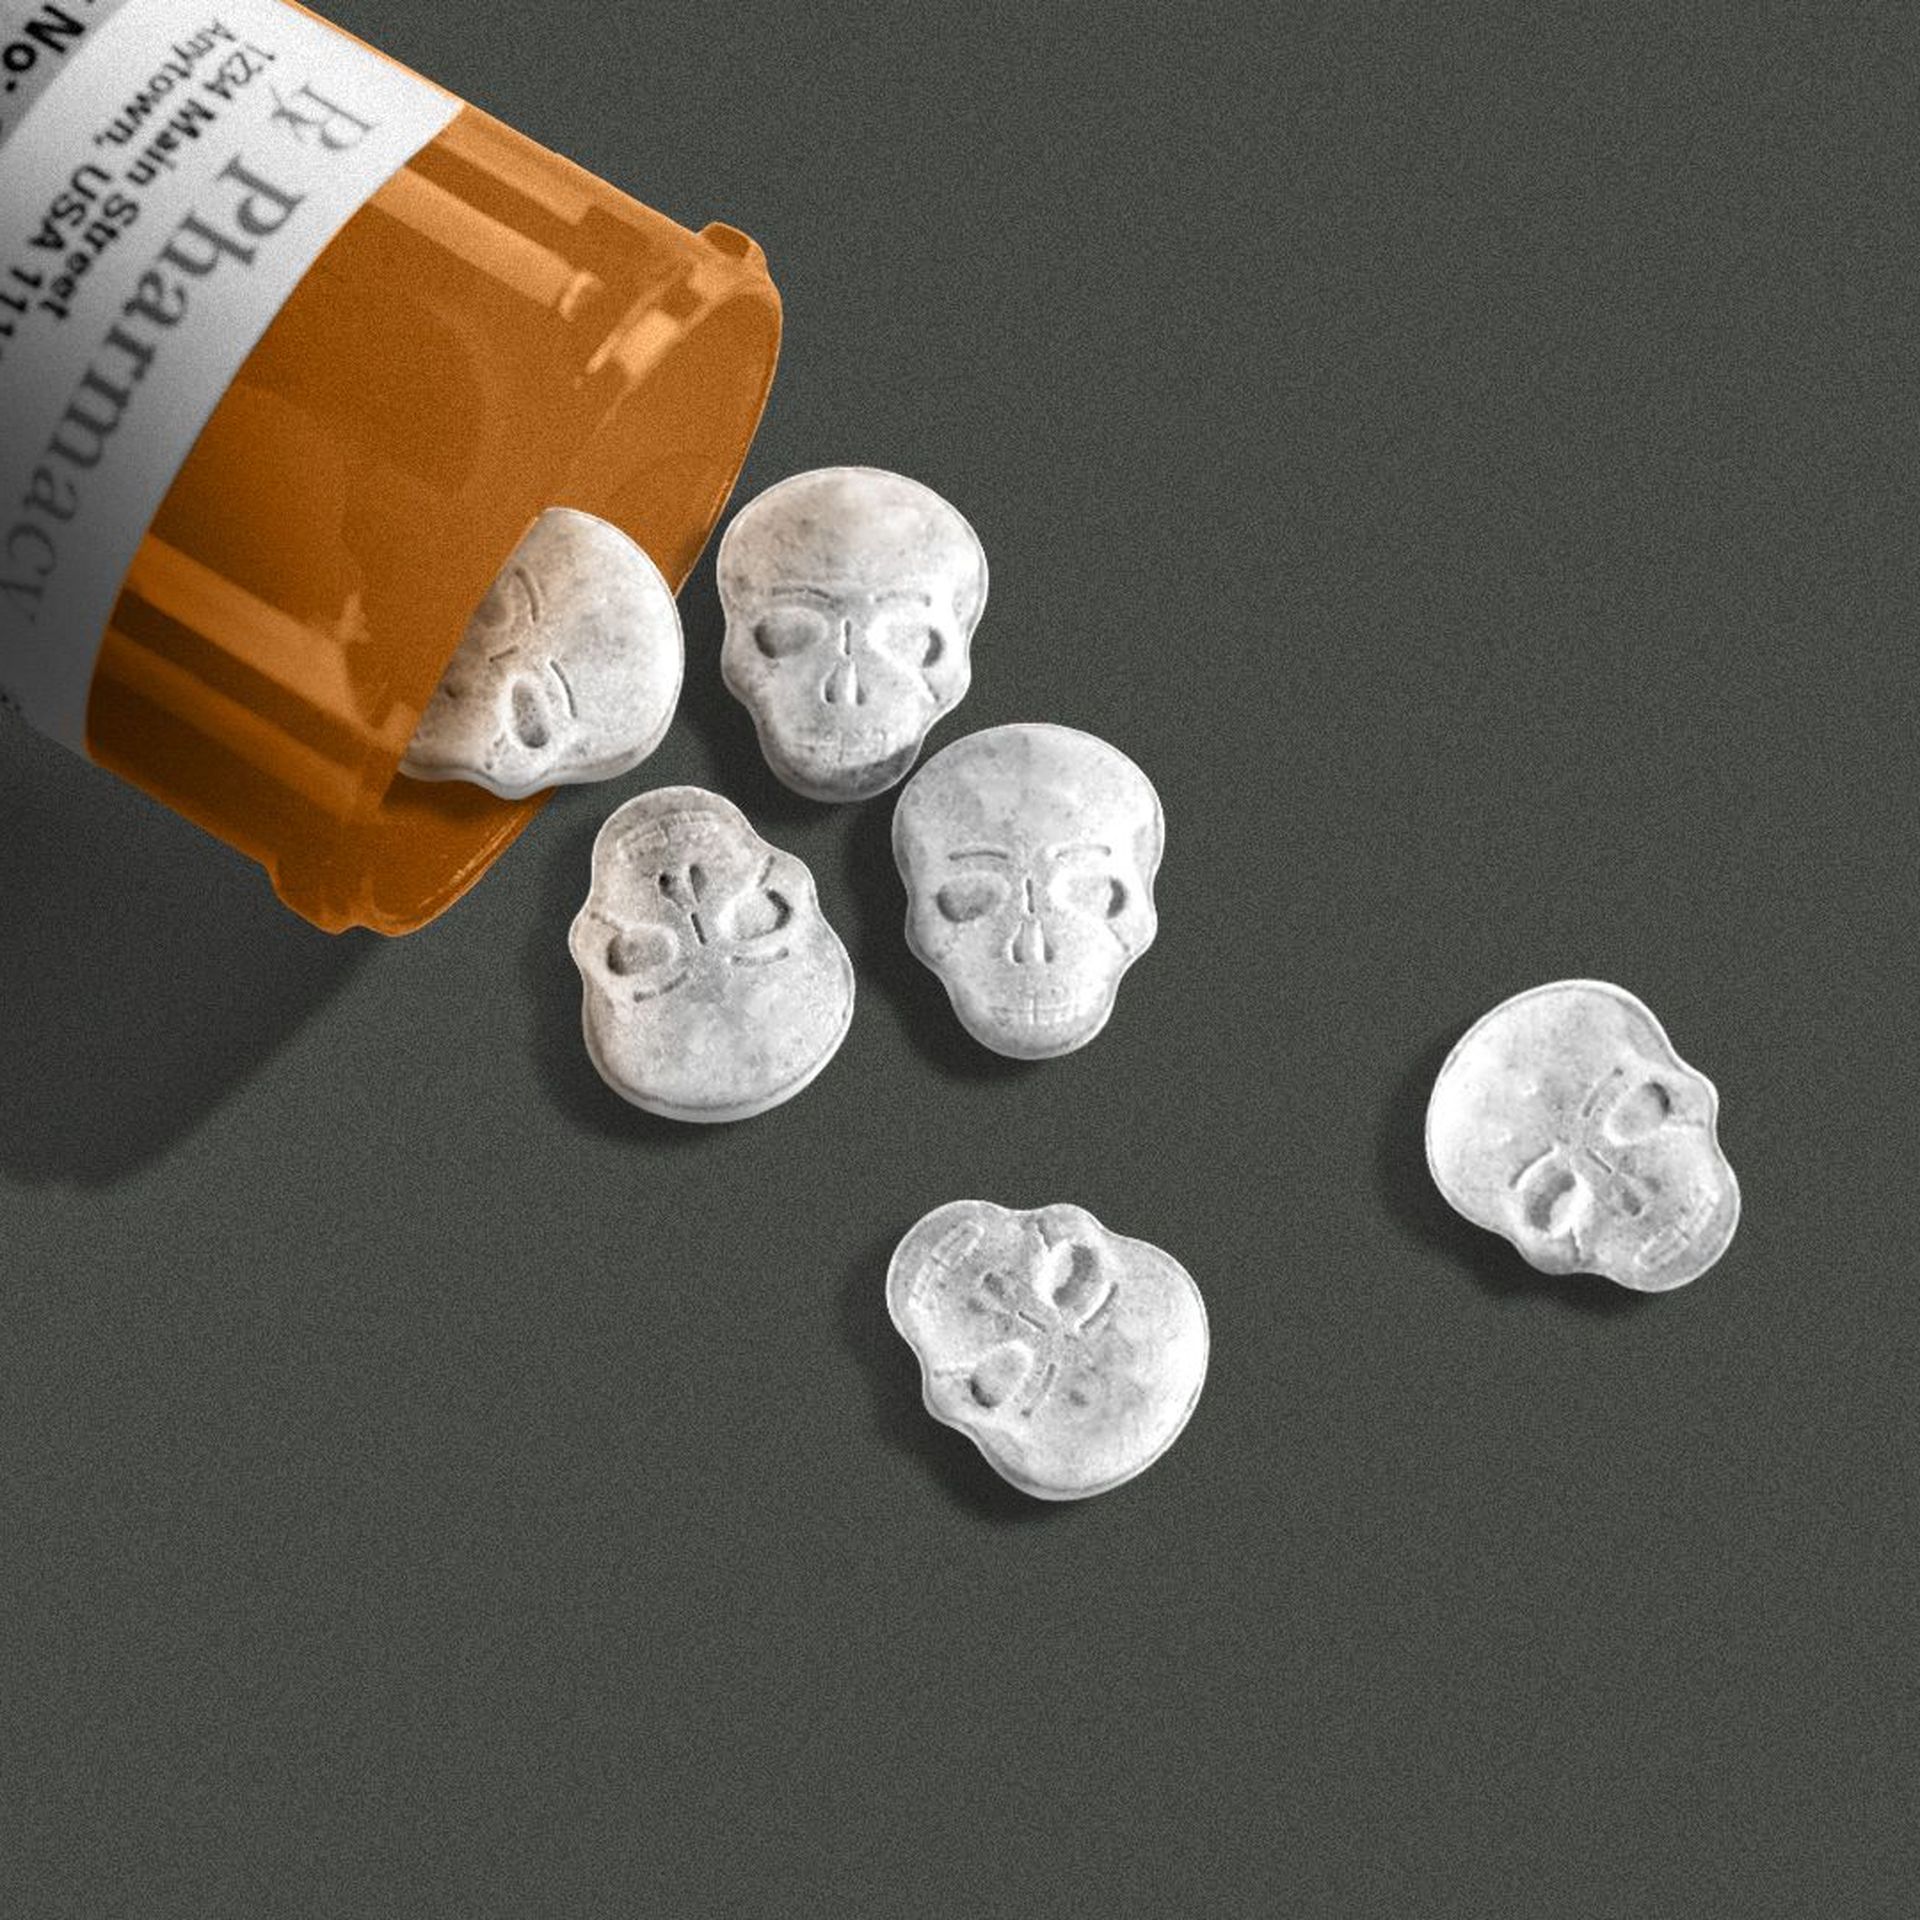 Illustration of skull-shaped pills coming out of a prescription bottle.